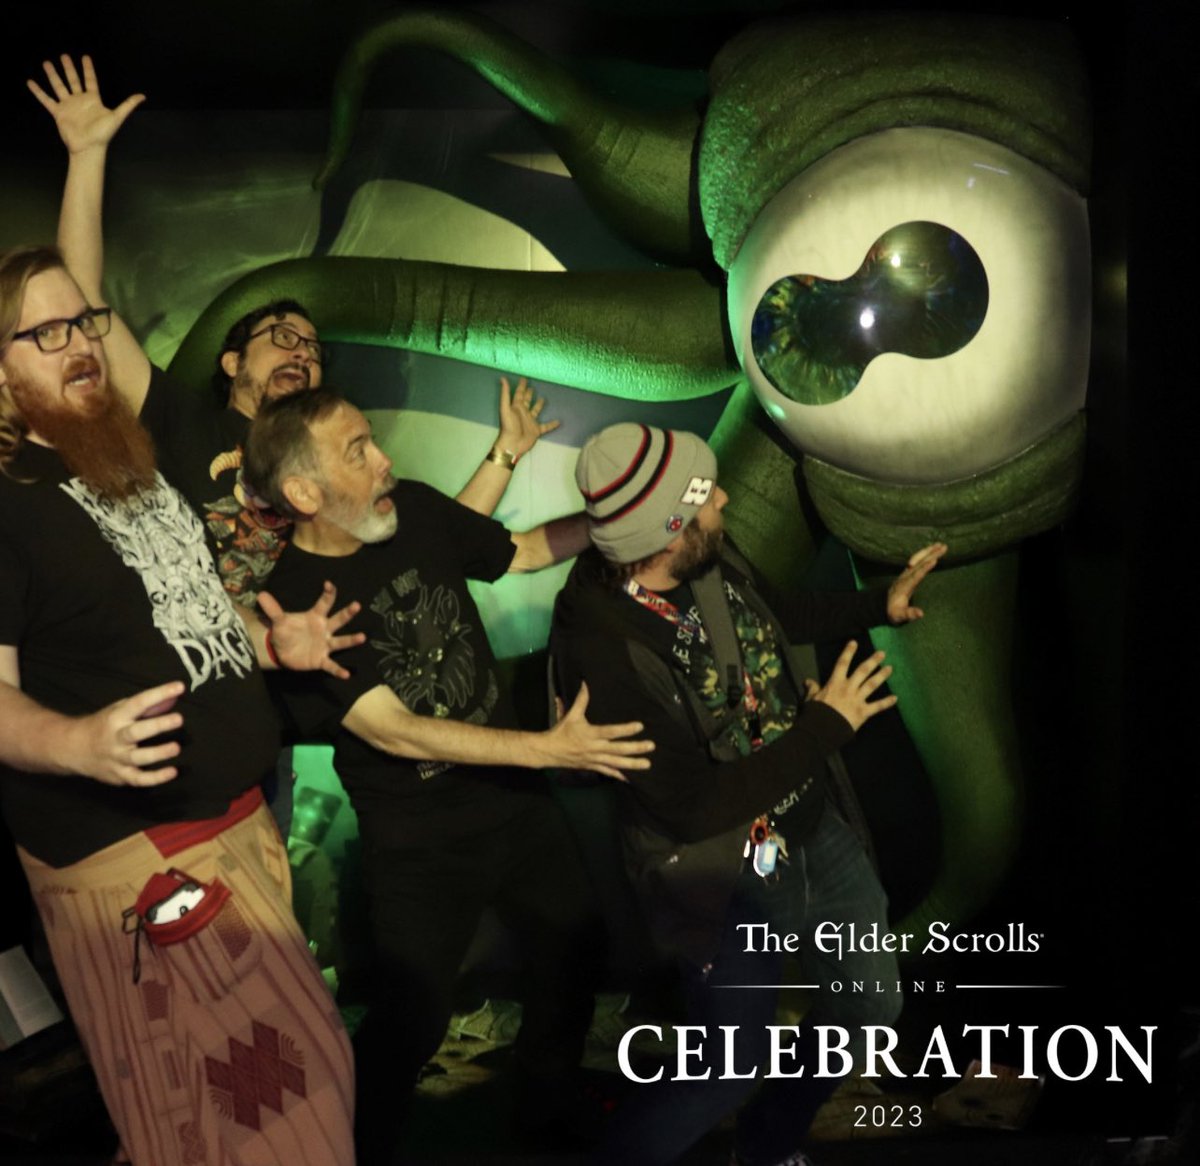 The #ESOCelebration in Vegas was so awesome!  

I got to meet and hang out with so many extraordinary people who love @TESOnline!

Thanks to everyone from @ZeniMax_Online for putting on this event, it was a blast and I can’t wait to see everyone again for the 10th anniversary!